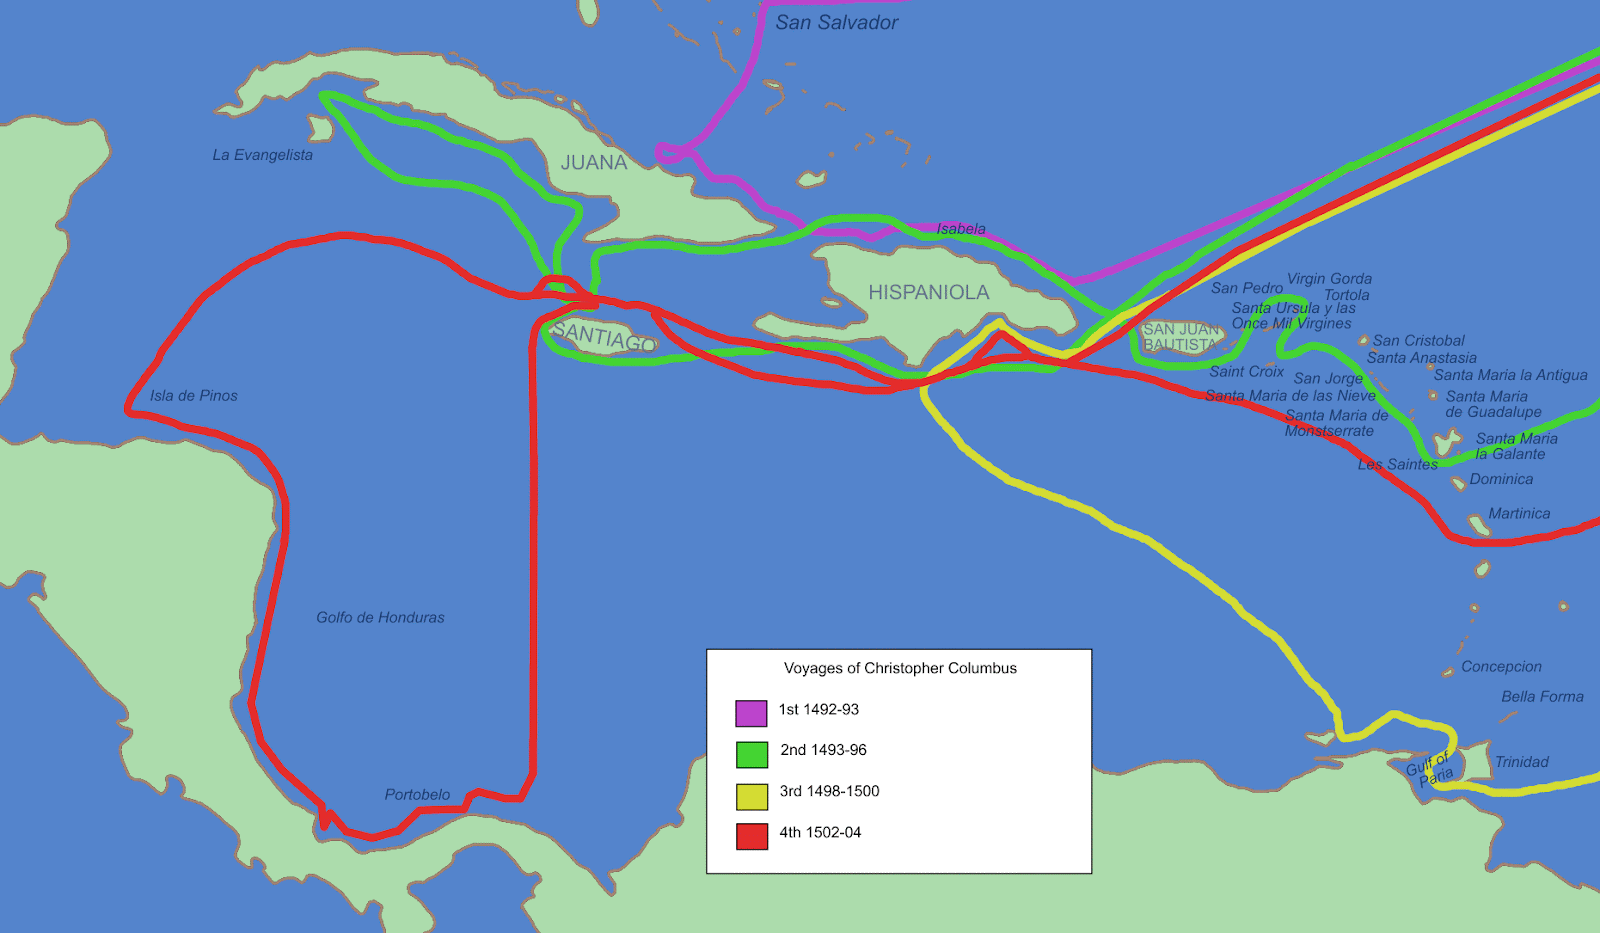 Map of the Bahamas illustrating the four voyages undertaken by Columbus, extending throughout the region.